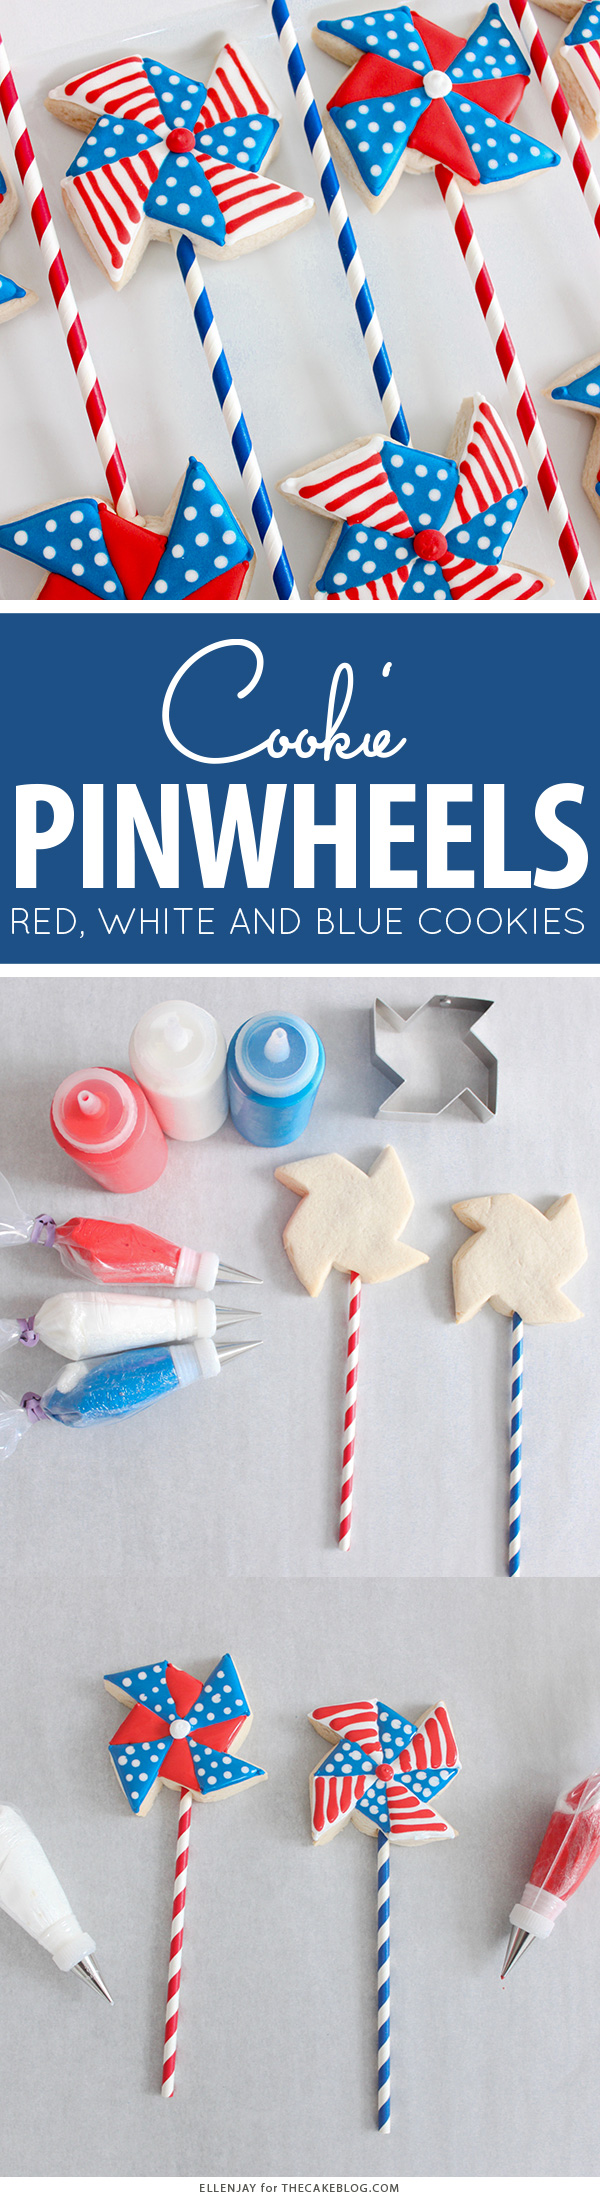 Pinwheel Cookies -- red, white and blue pinwheel cookies on a stick | by ellenJAY for TheCakeBlog.com